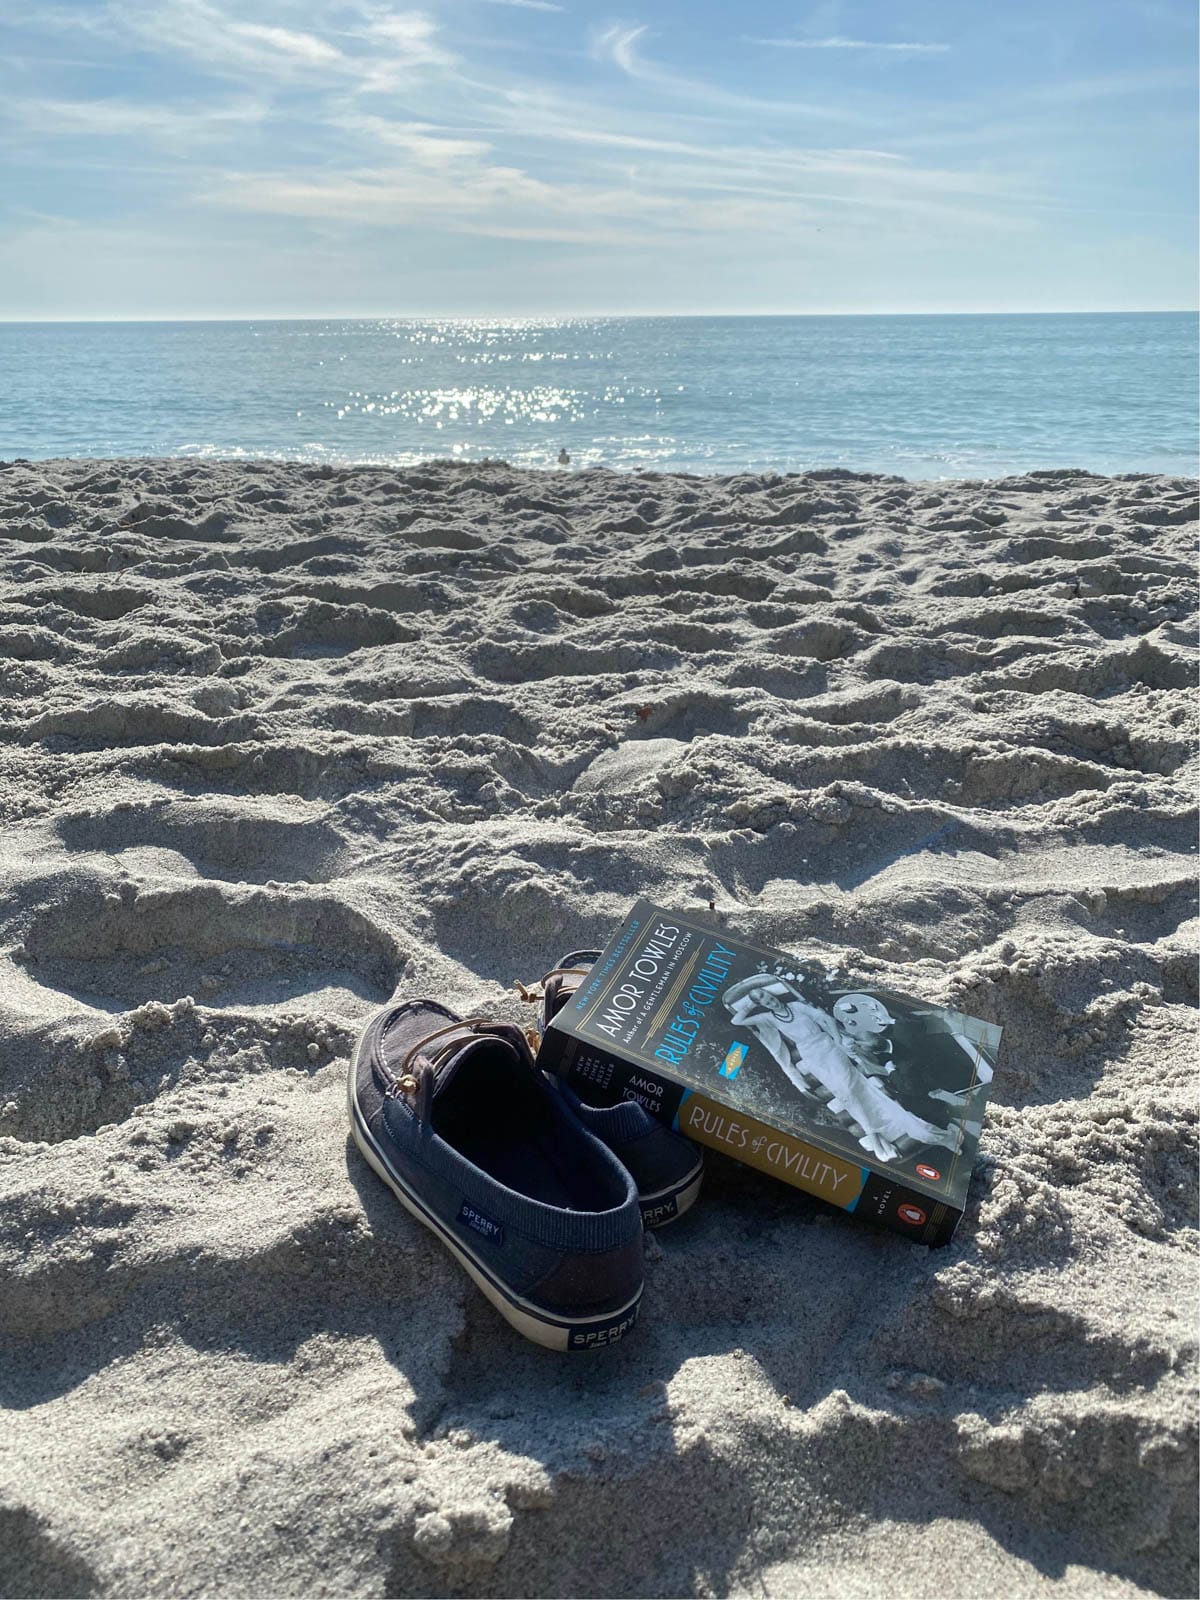 Book and shoes in the sand at the beach.